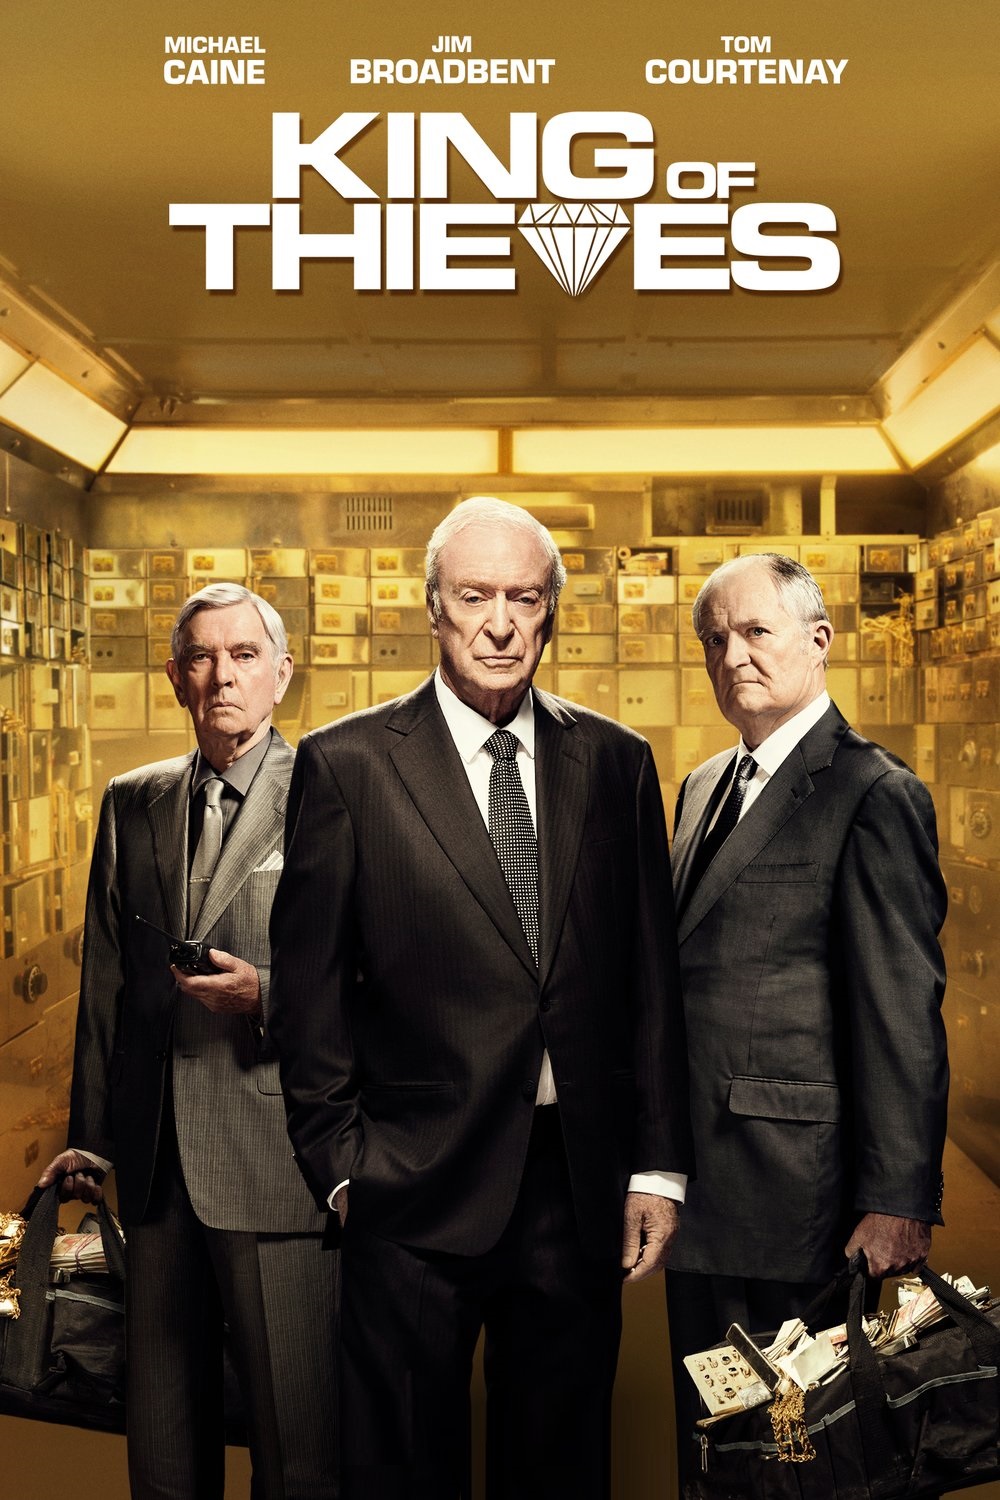 King of Thieves [HD] (2018)